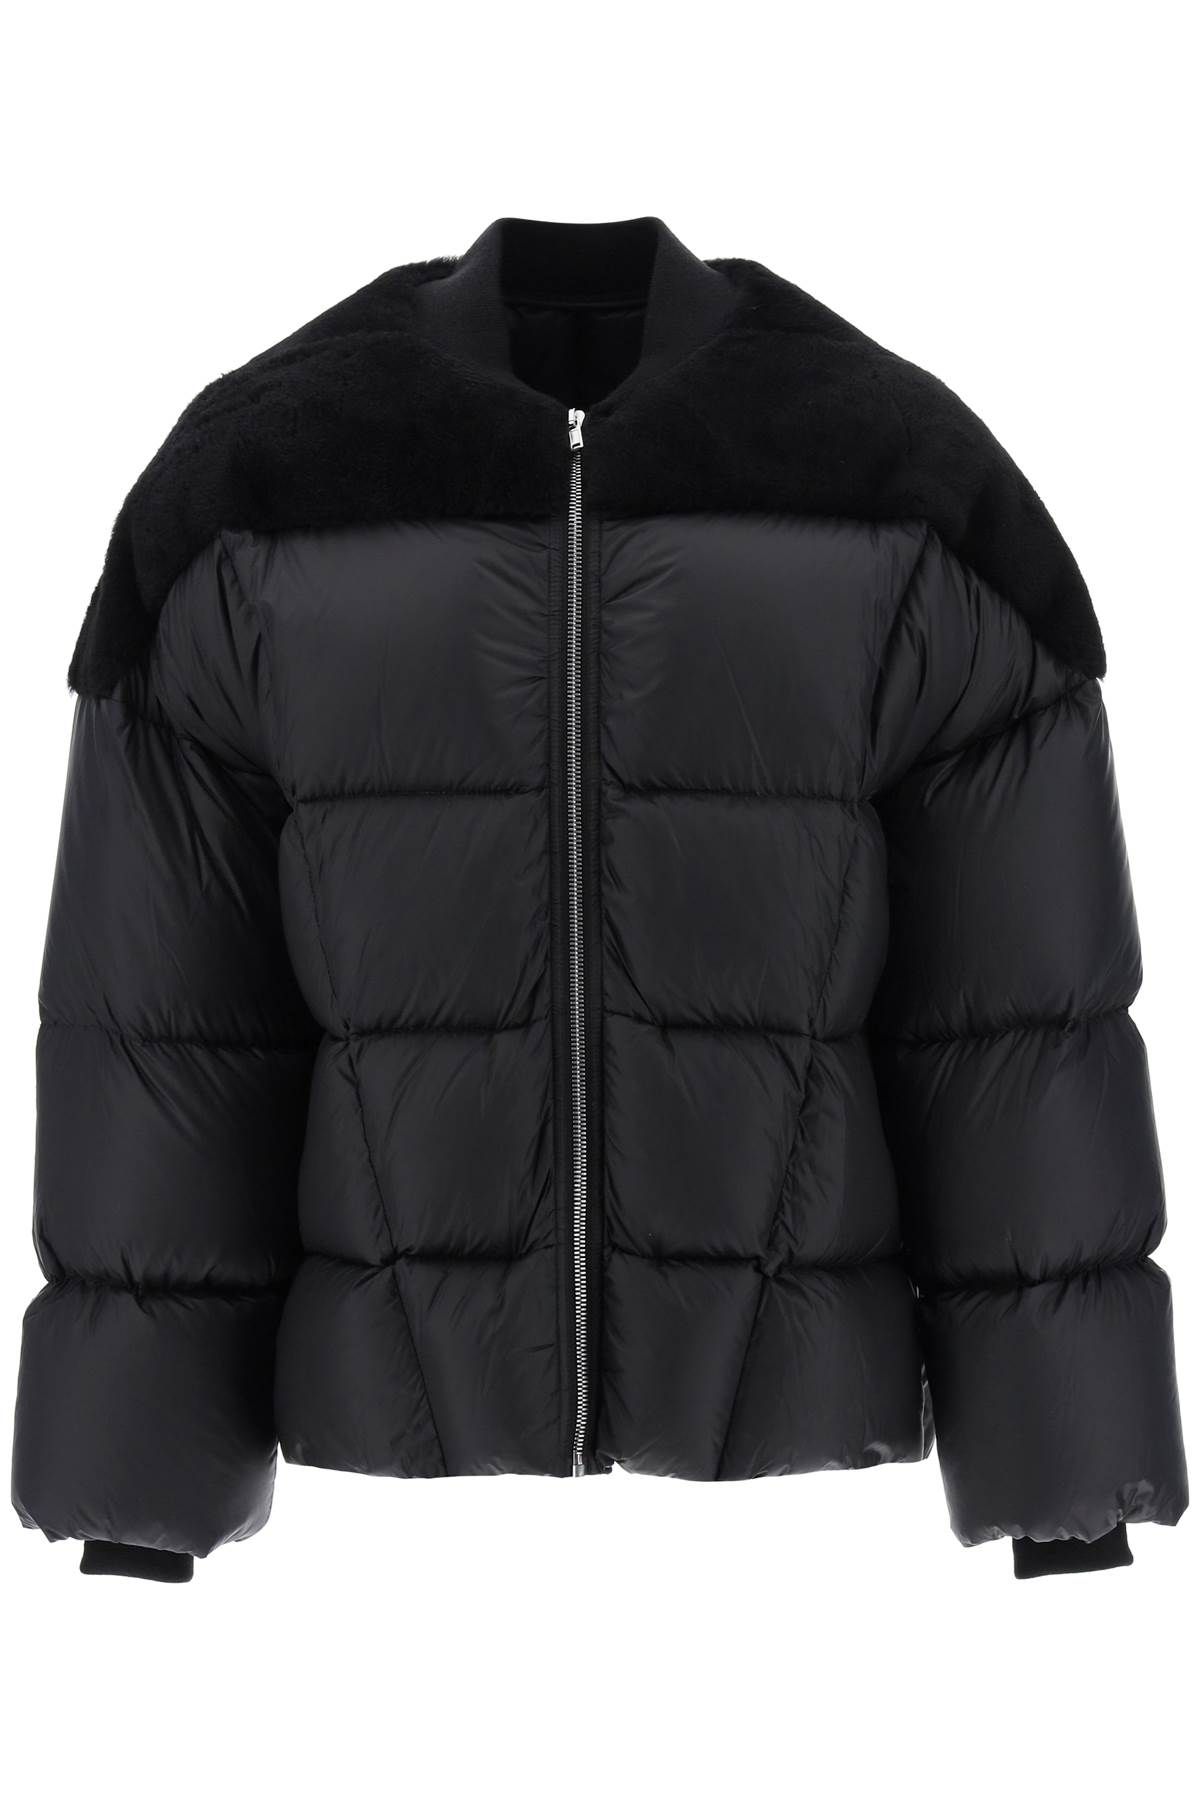 RICK OWENS OVERSIZED PUFFER JACKET WITH SHEARLING INSERT